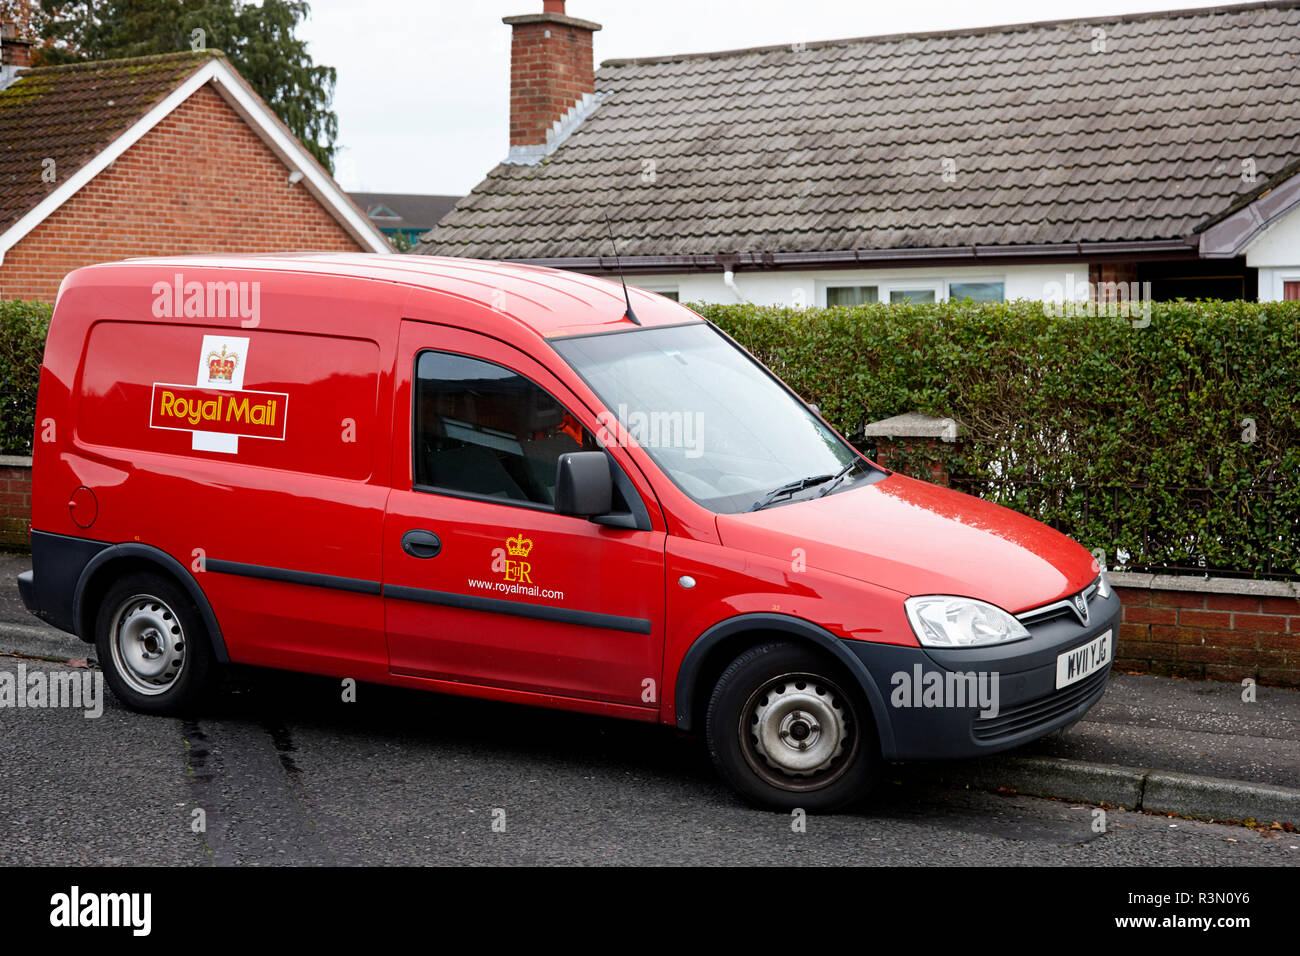 Royal Mail delivery van parked on kerb outside house in residential area Stock Photo